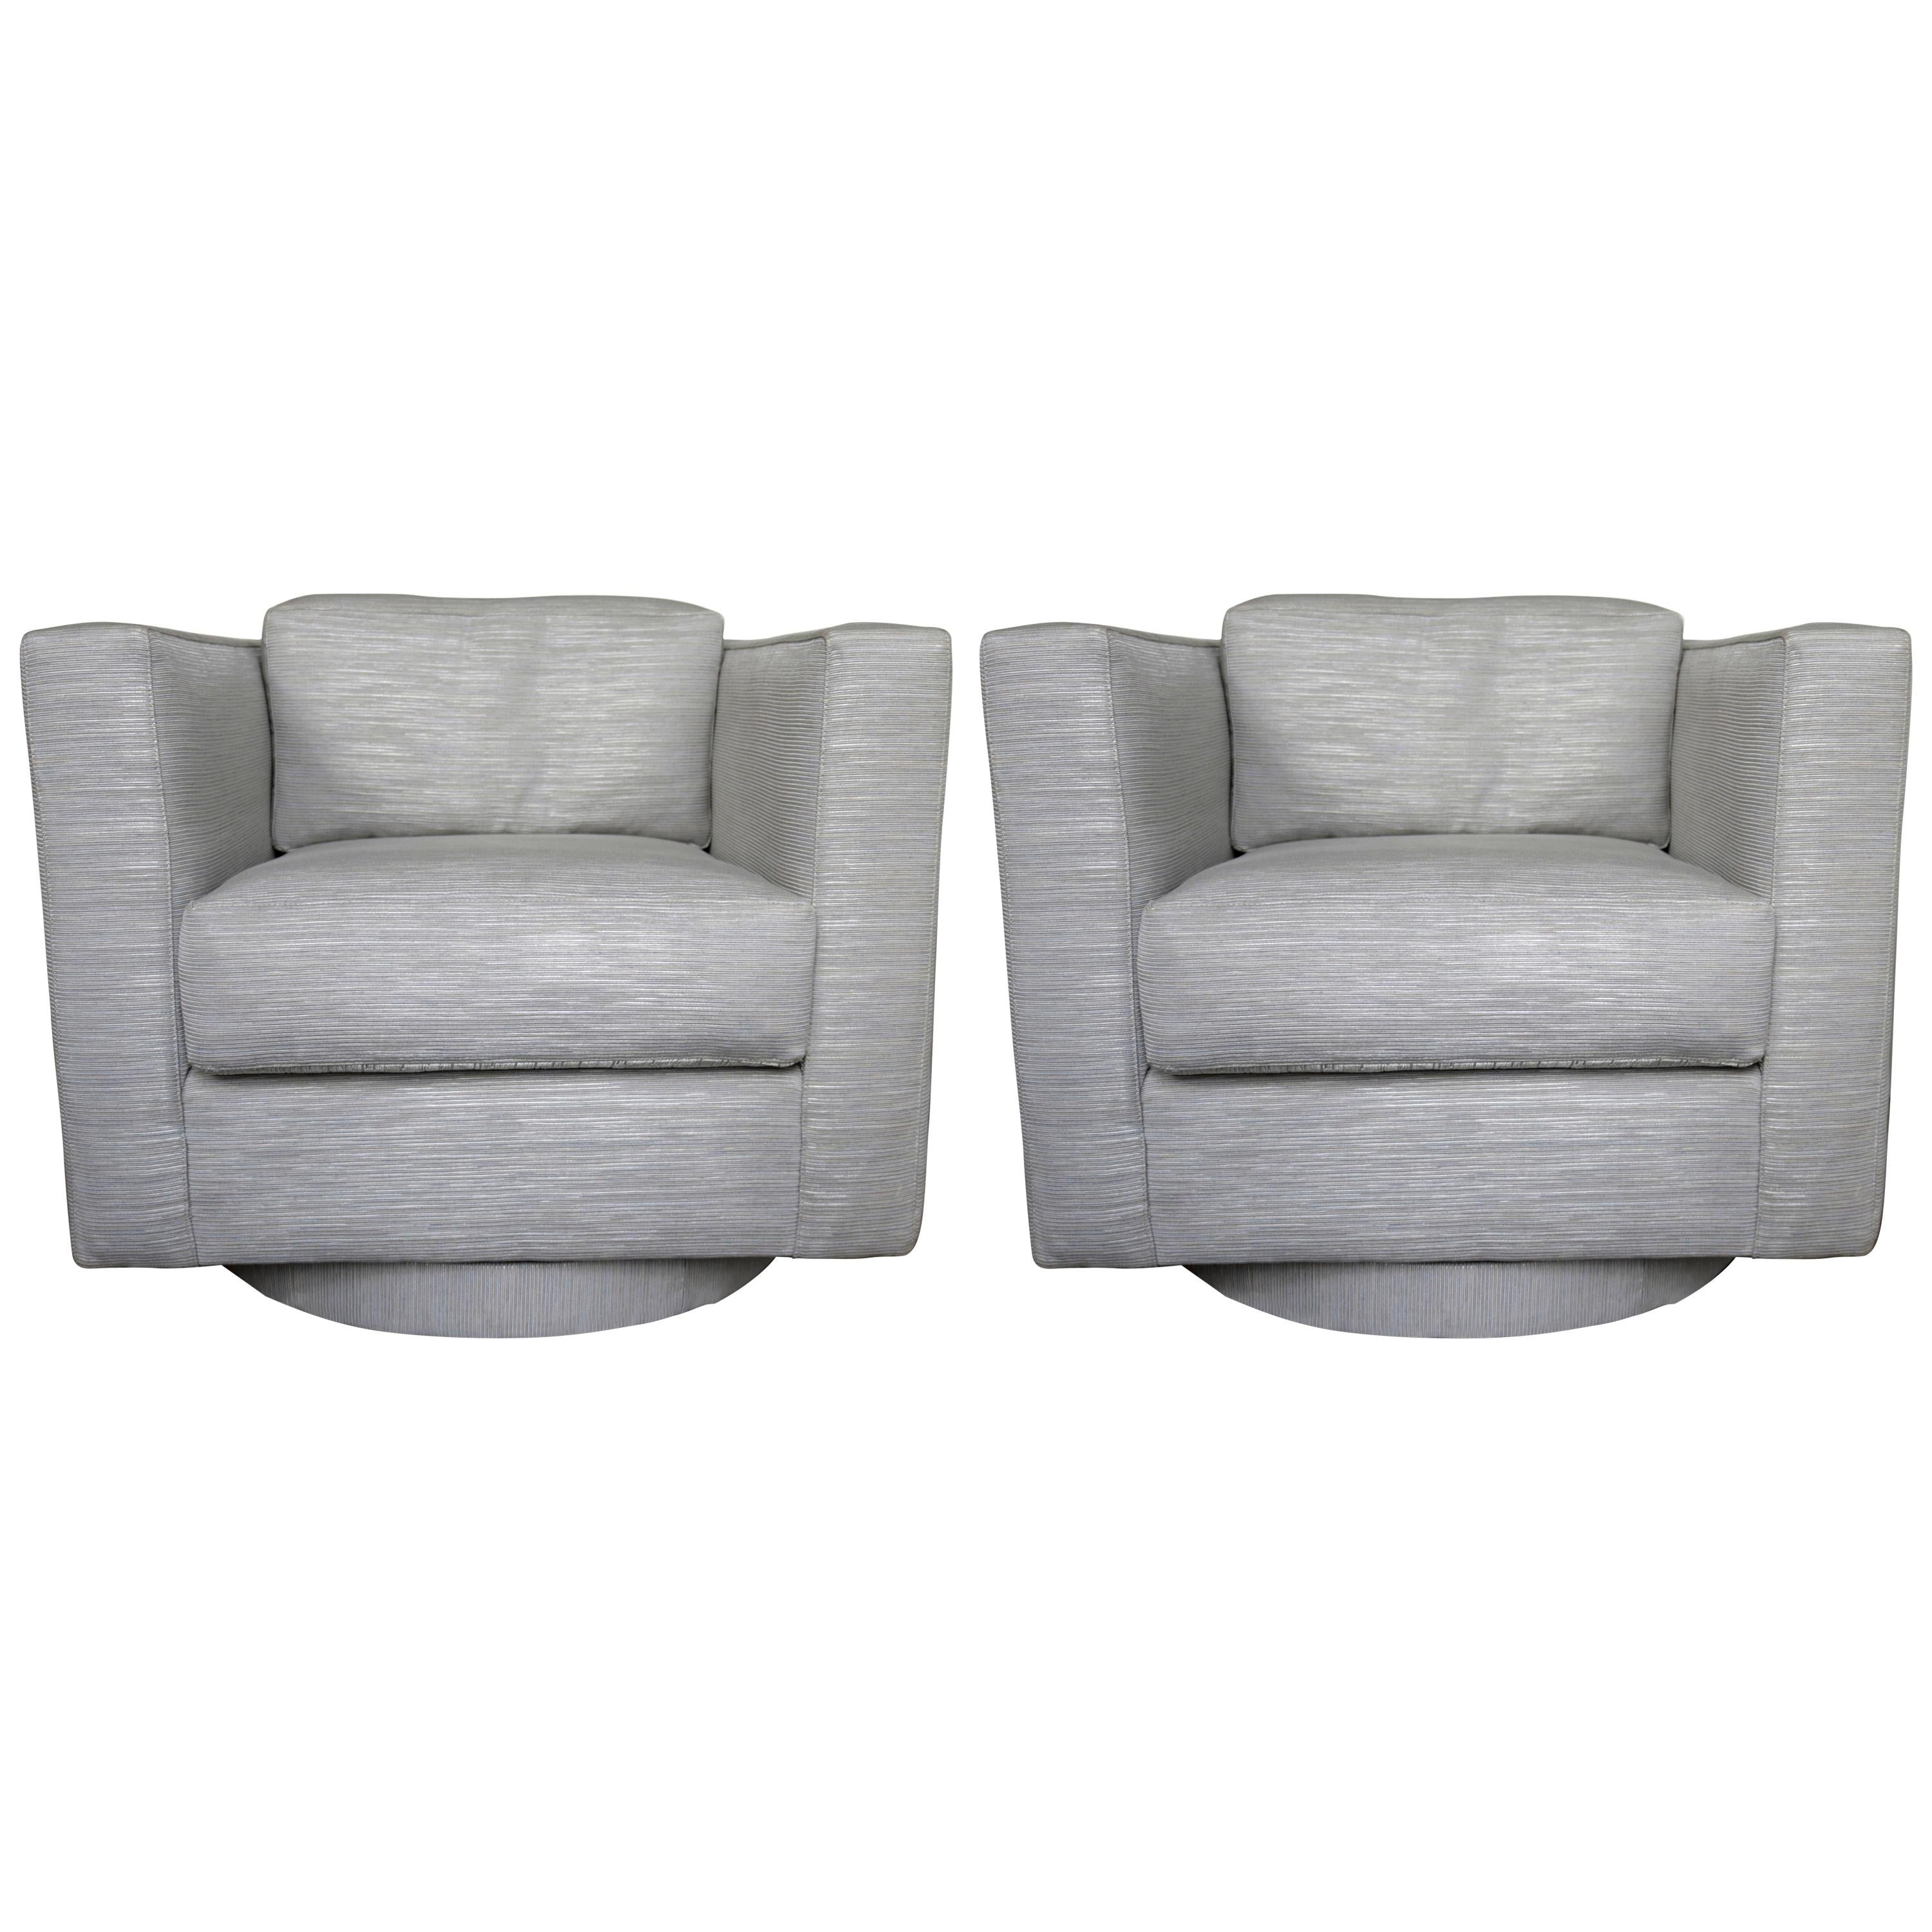 Set of Two Grey Upholstered Tuxedo Swivel Chairs by Harvey Probber